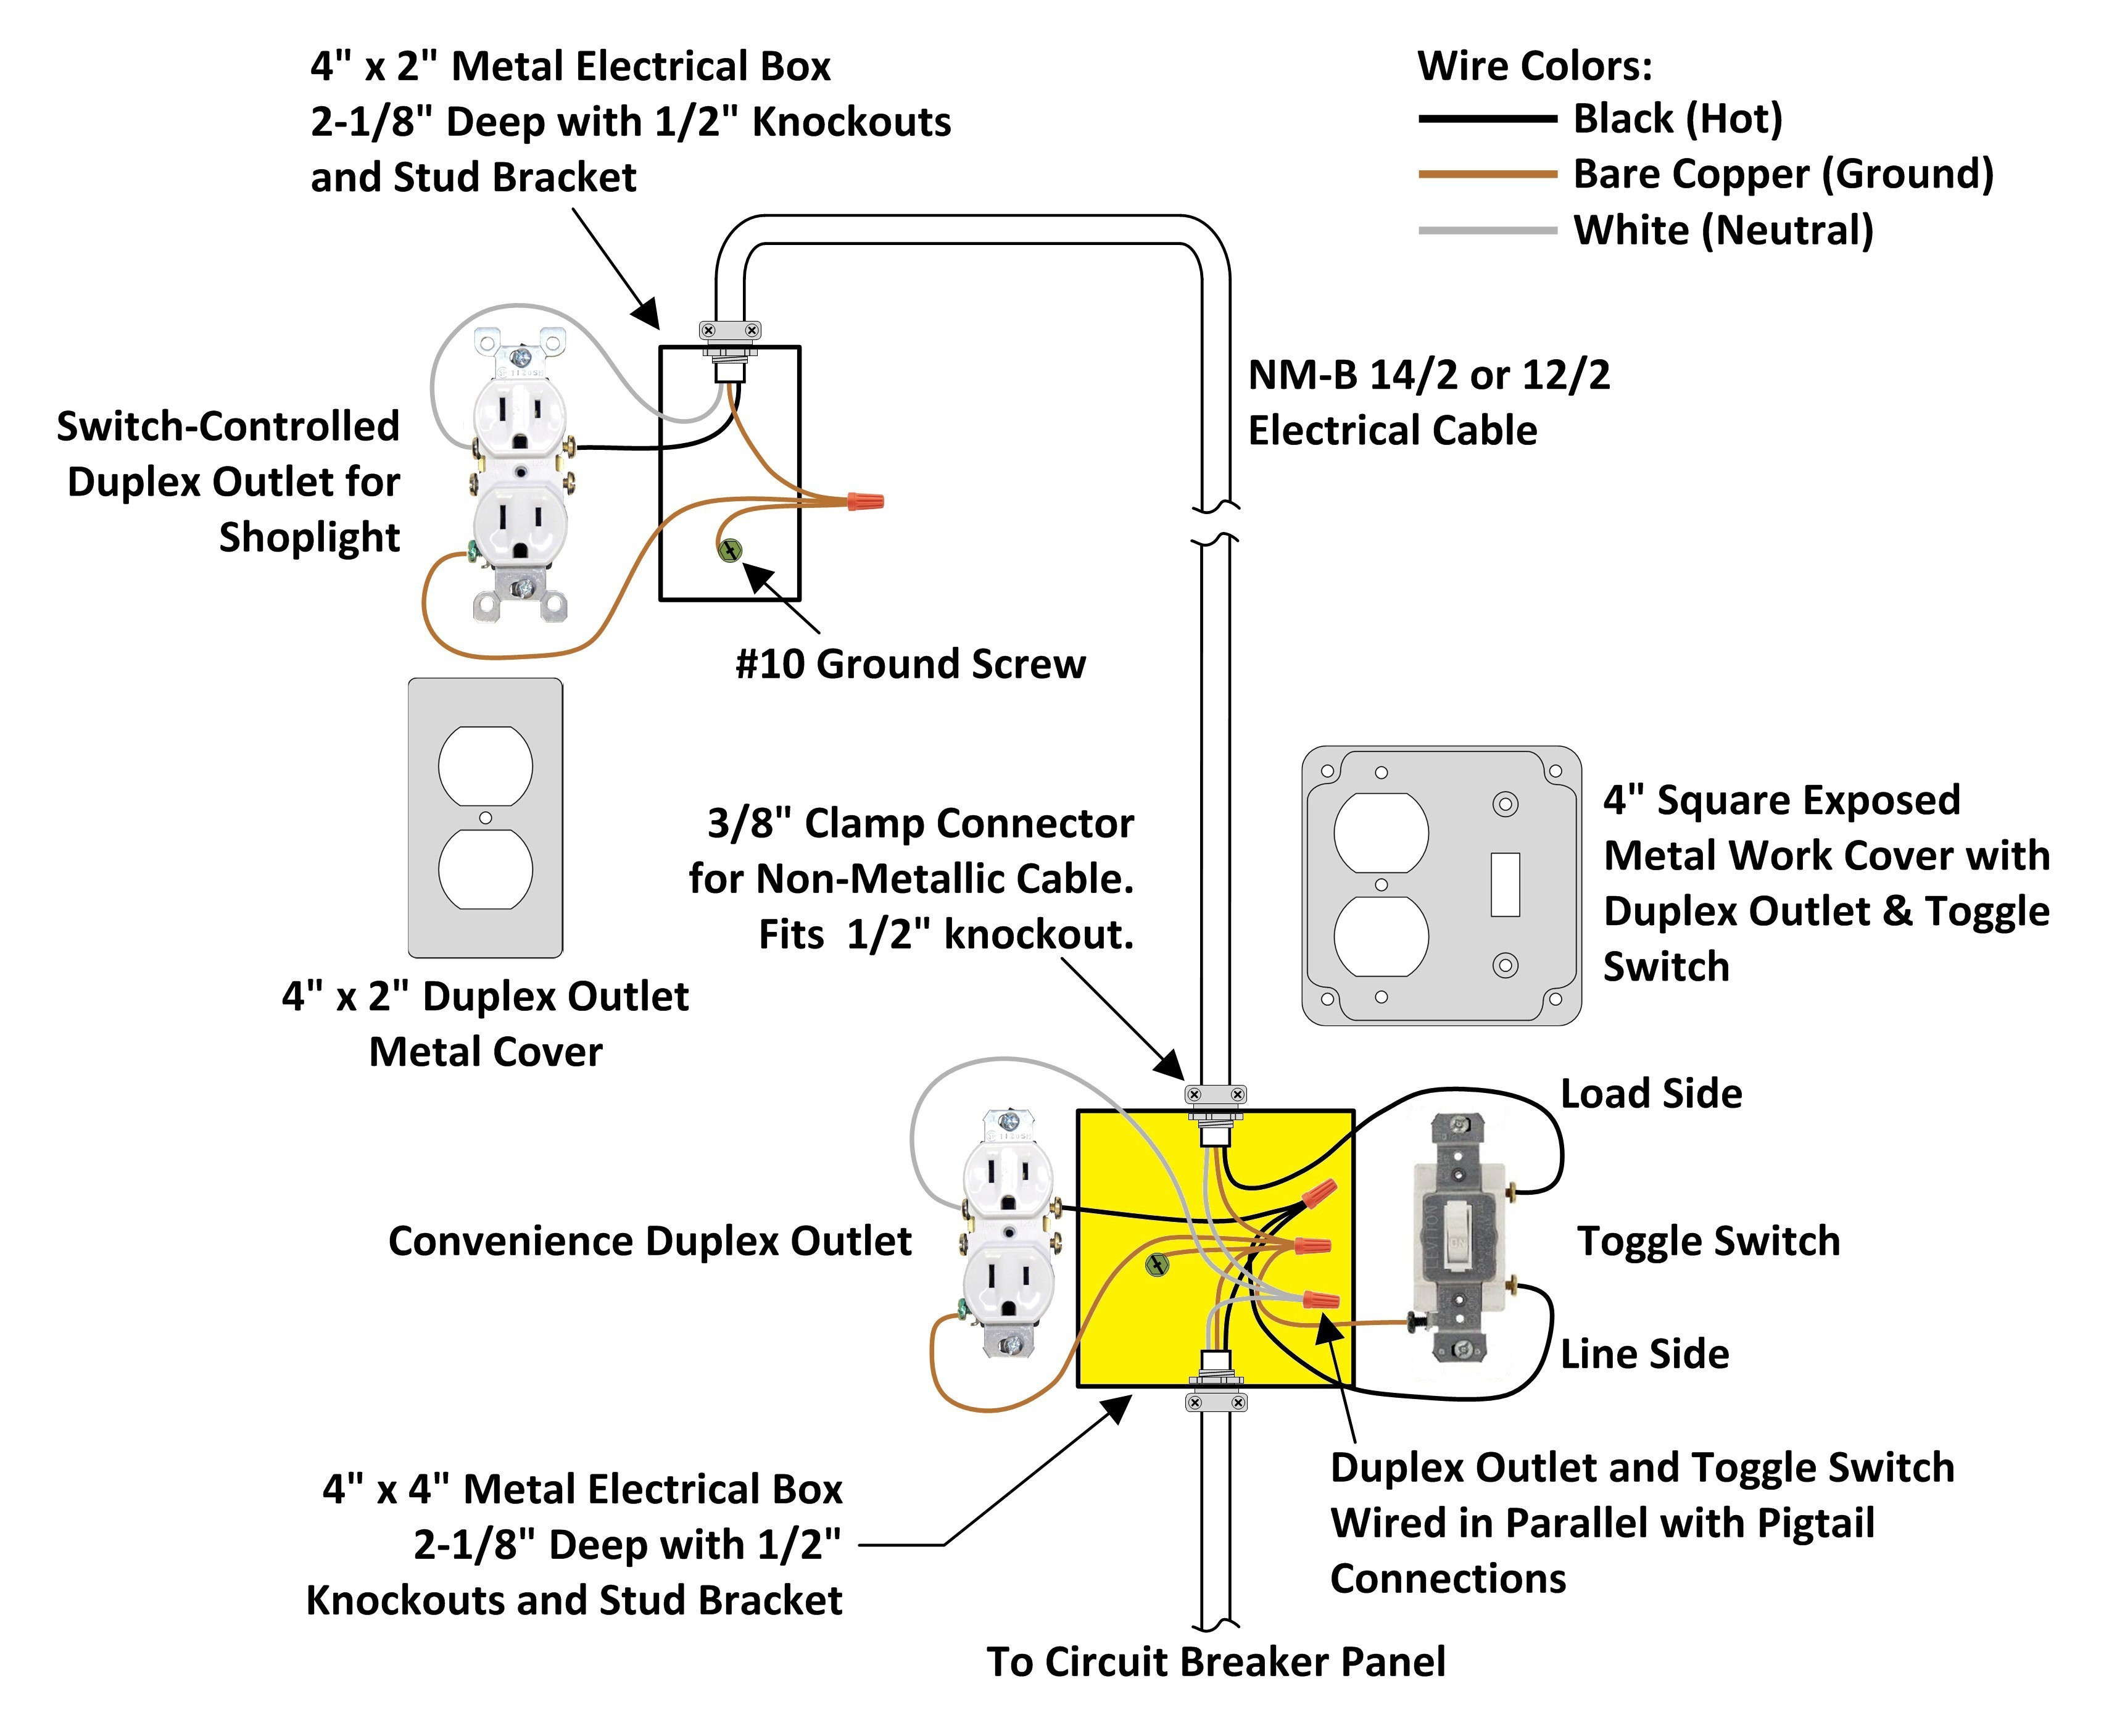 Wiring Diagram Plug Switch Light Copy Wiring Diagram for Plug and Switch Archives Elisaymk Fresh